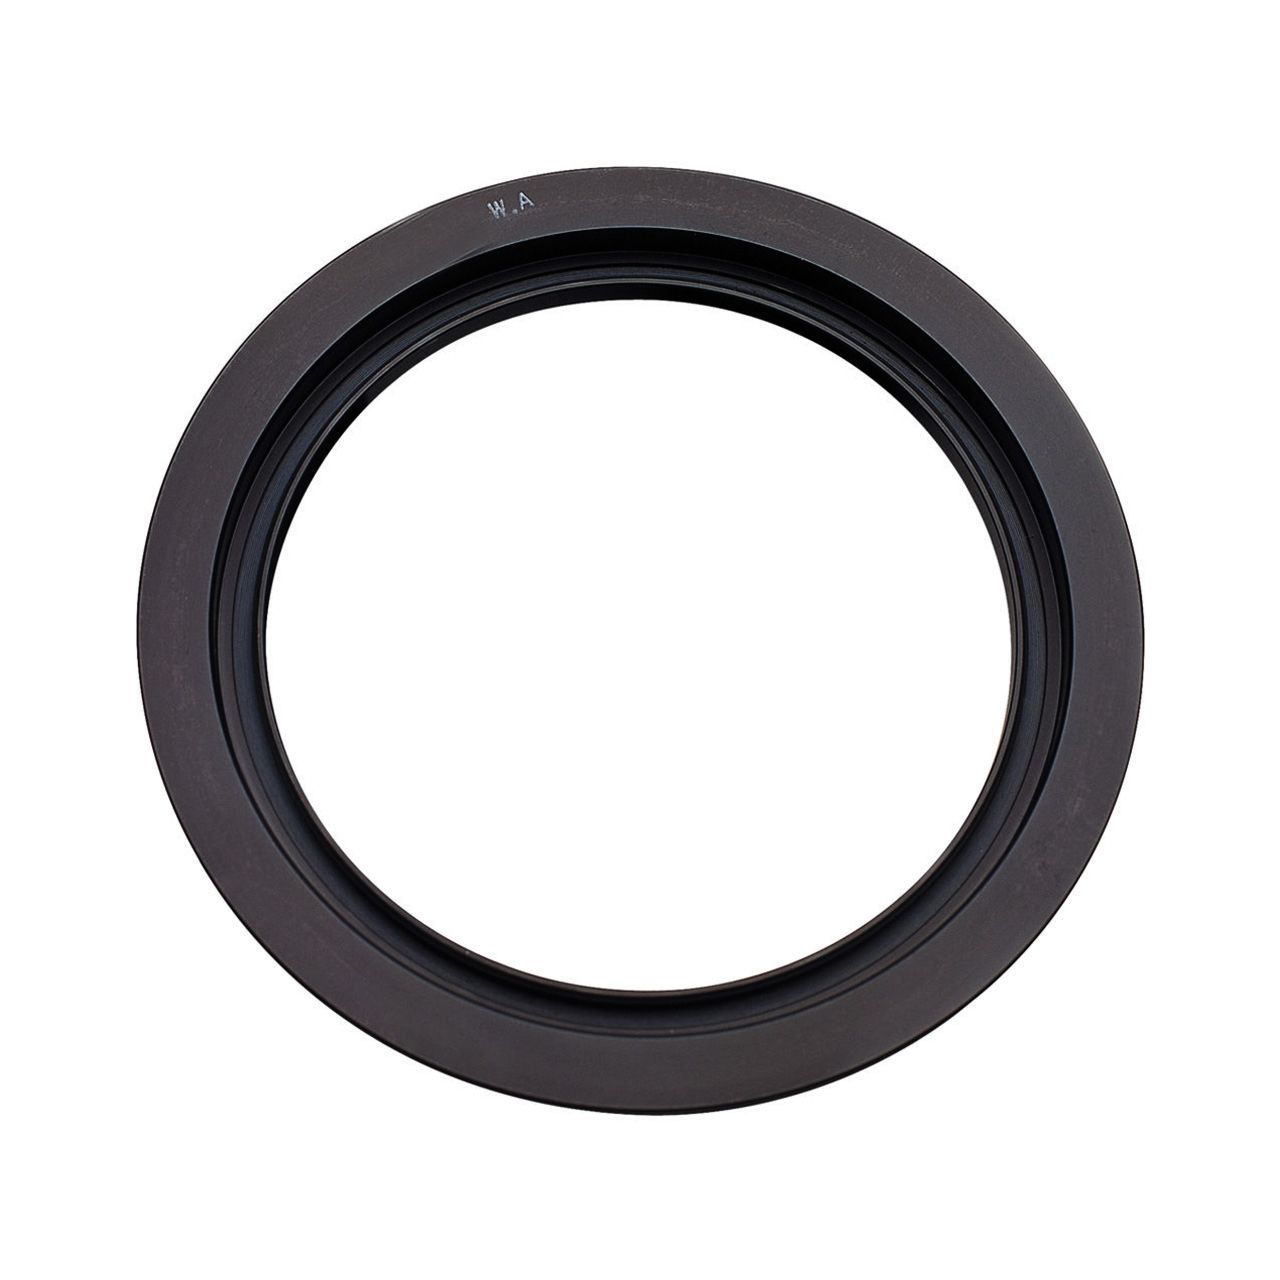 LEE Filters Wide Angle Adapter Ring 72Mm